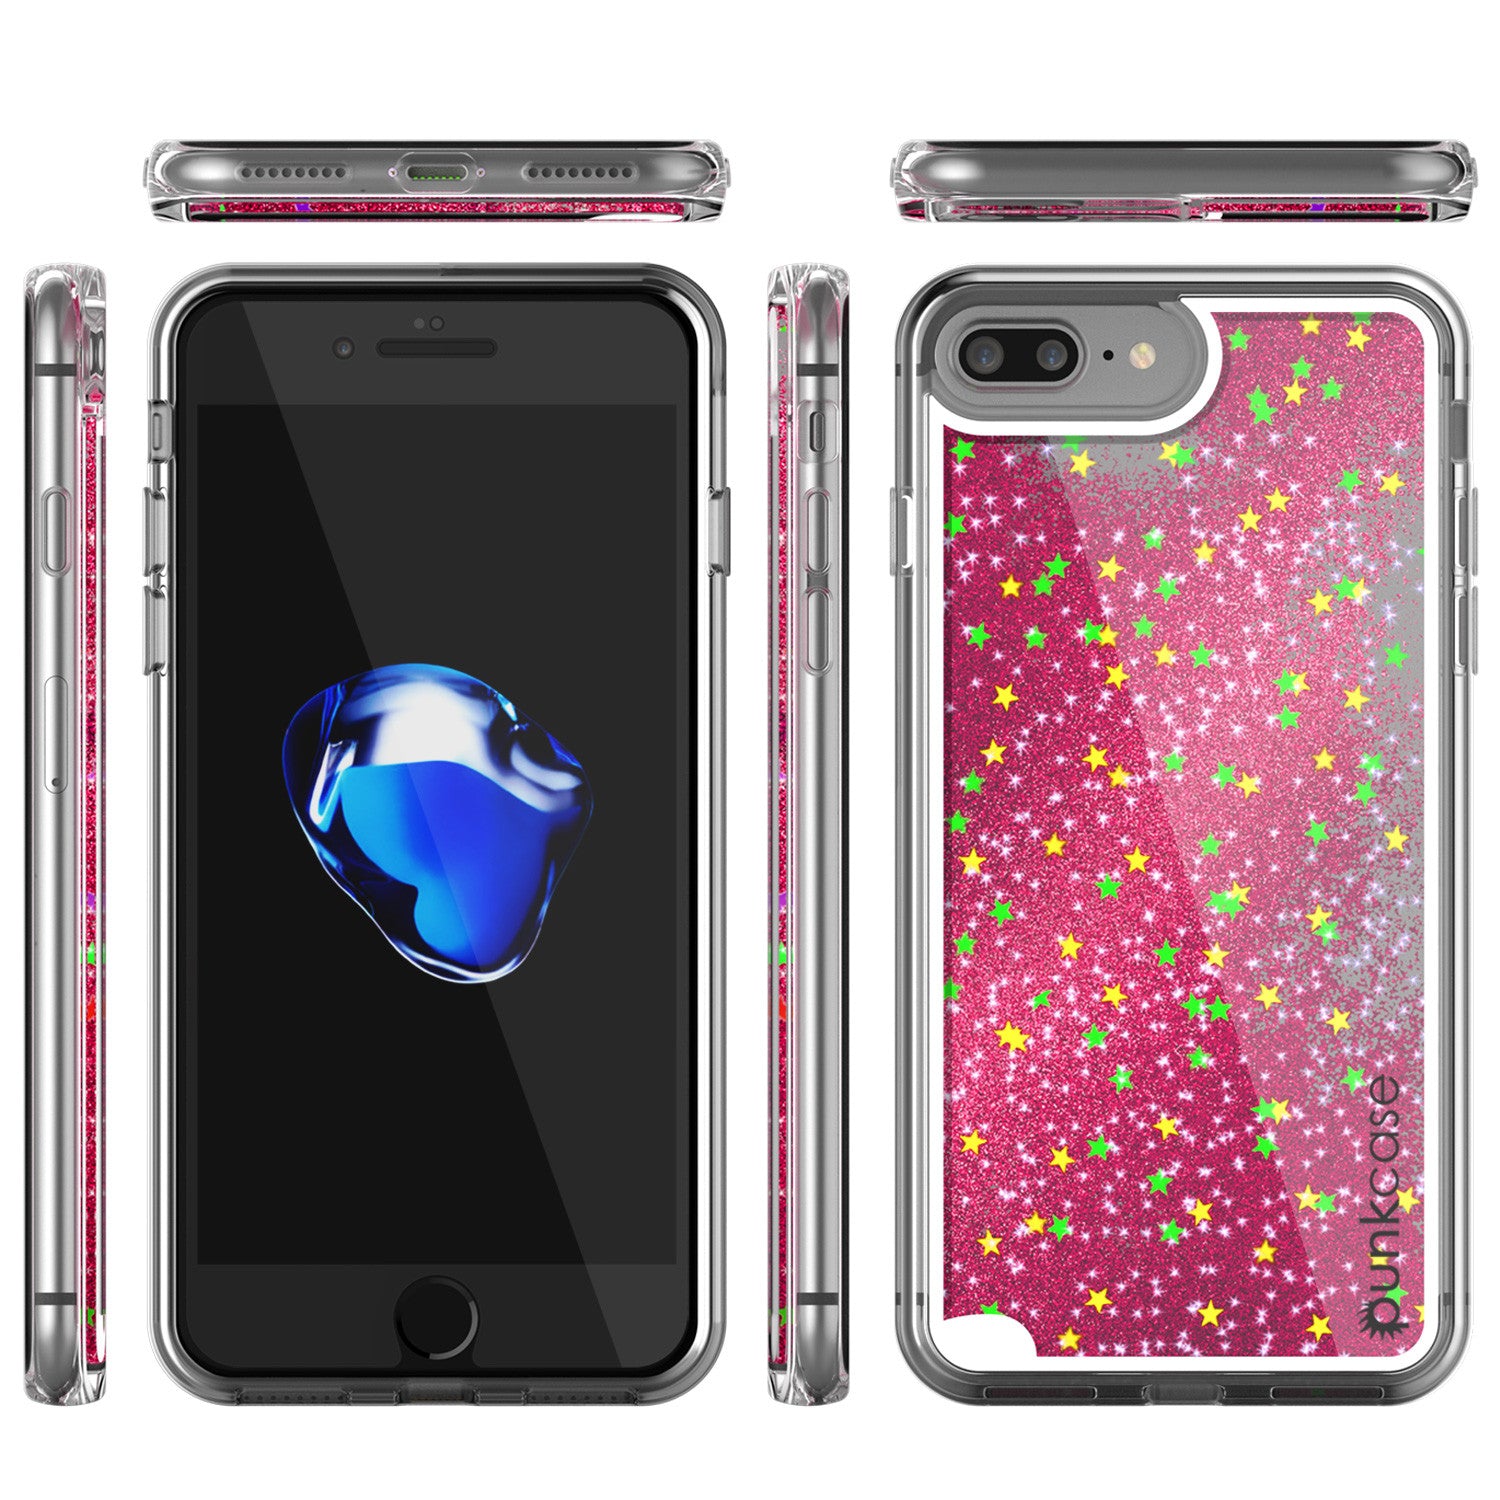 iPhone 7 Sparkling Case Pink